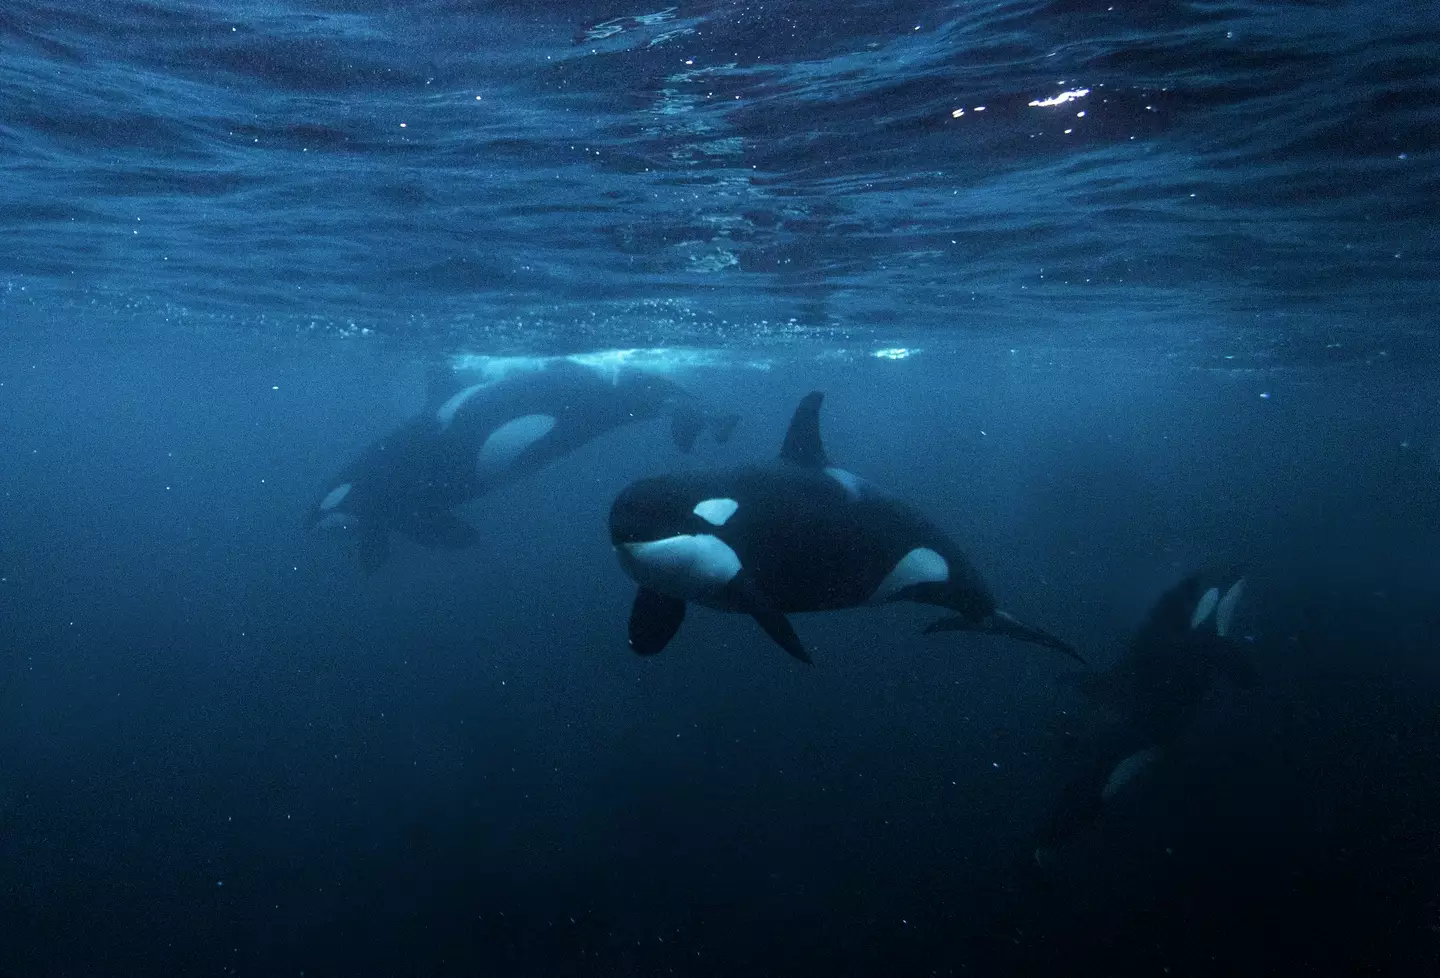 Wild male orcas tend to live to the age of 30, while females can live to between 30-90 years.